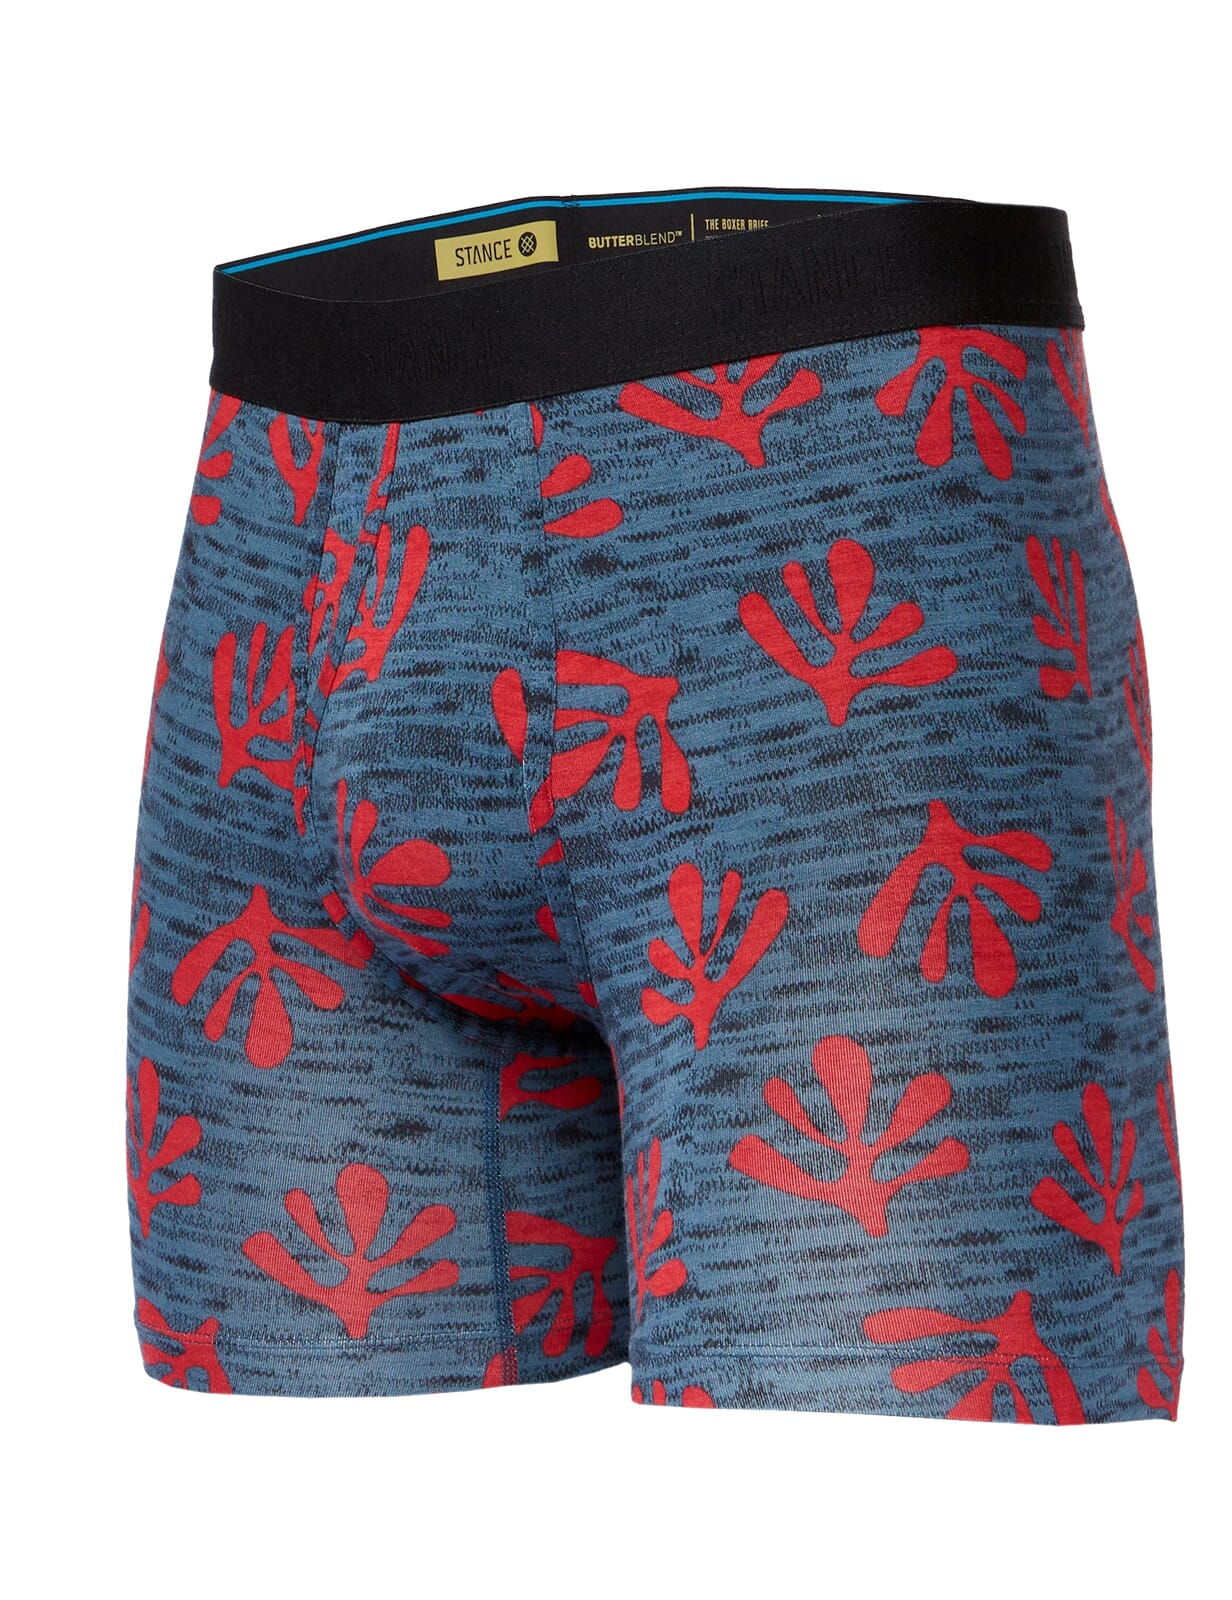 Stance Maxwell Wholester Boxers in Navy